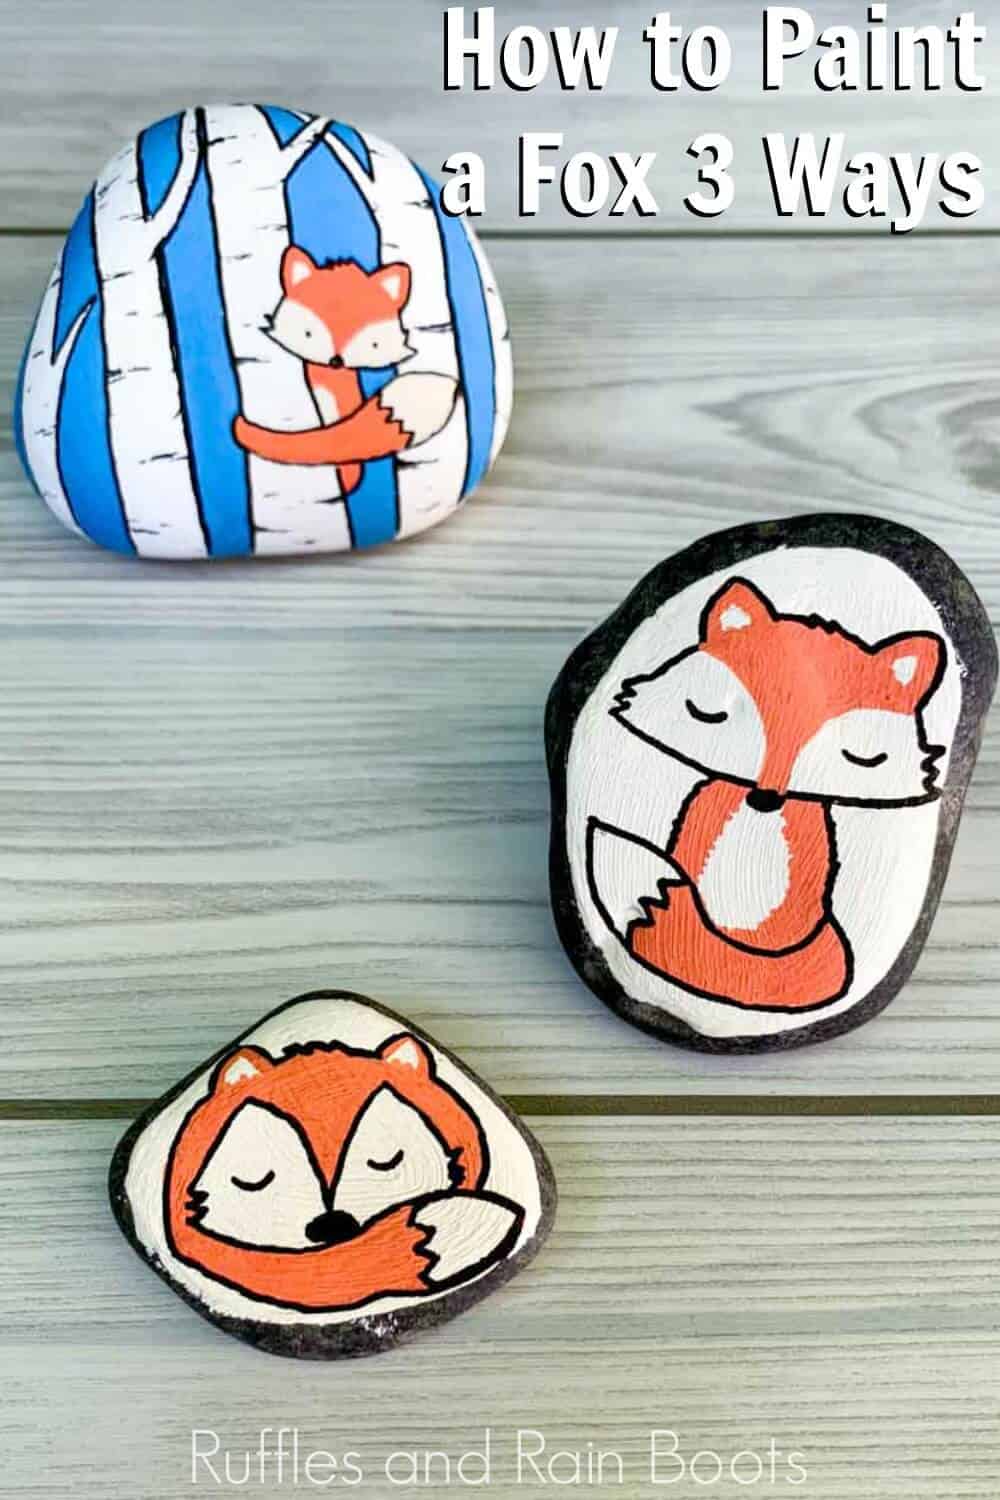 Sitting fox rock painting, sleeping fox rock painting, and peek-a-boo fox in the forest rock painting on wood background.